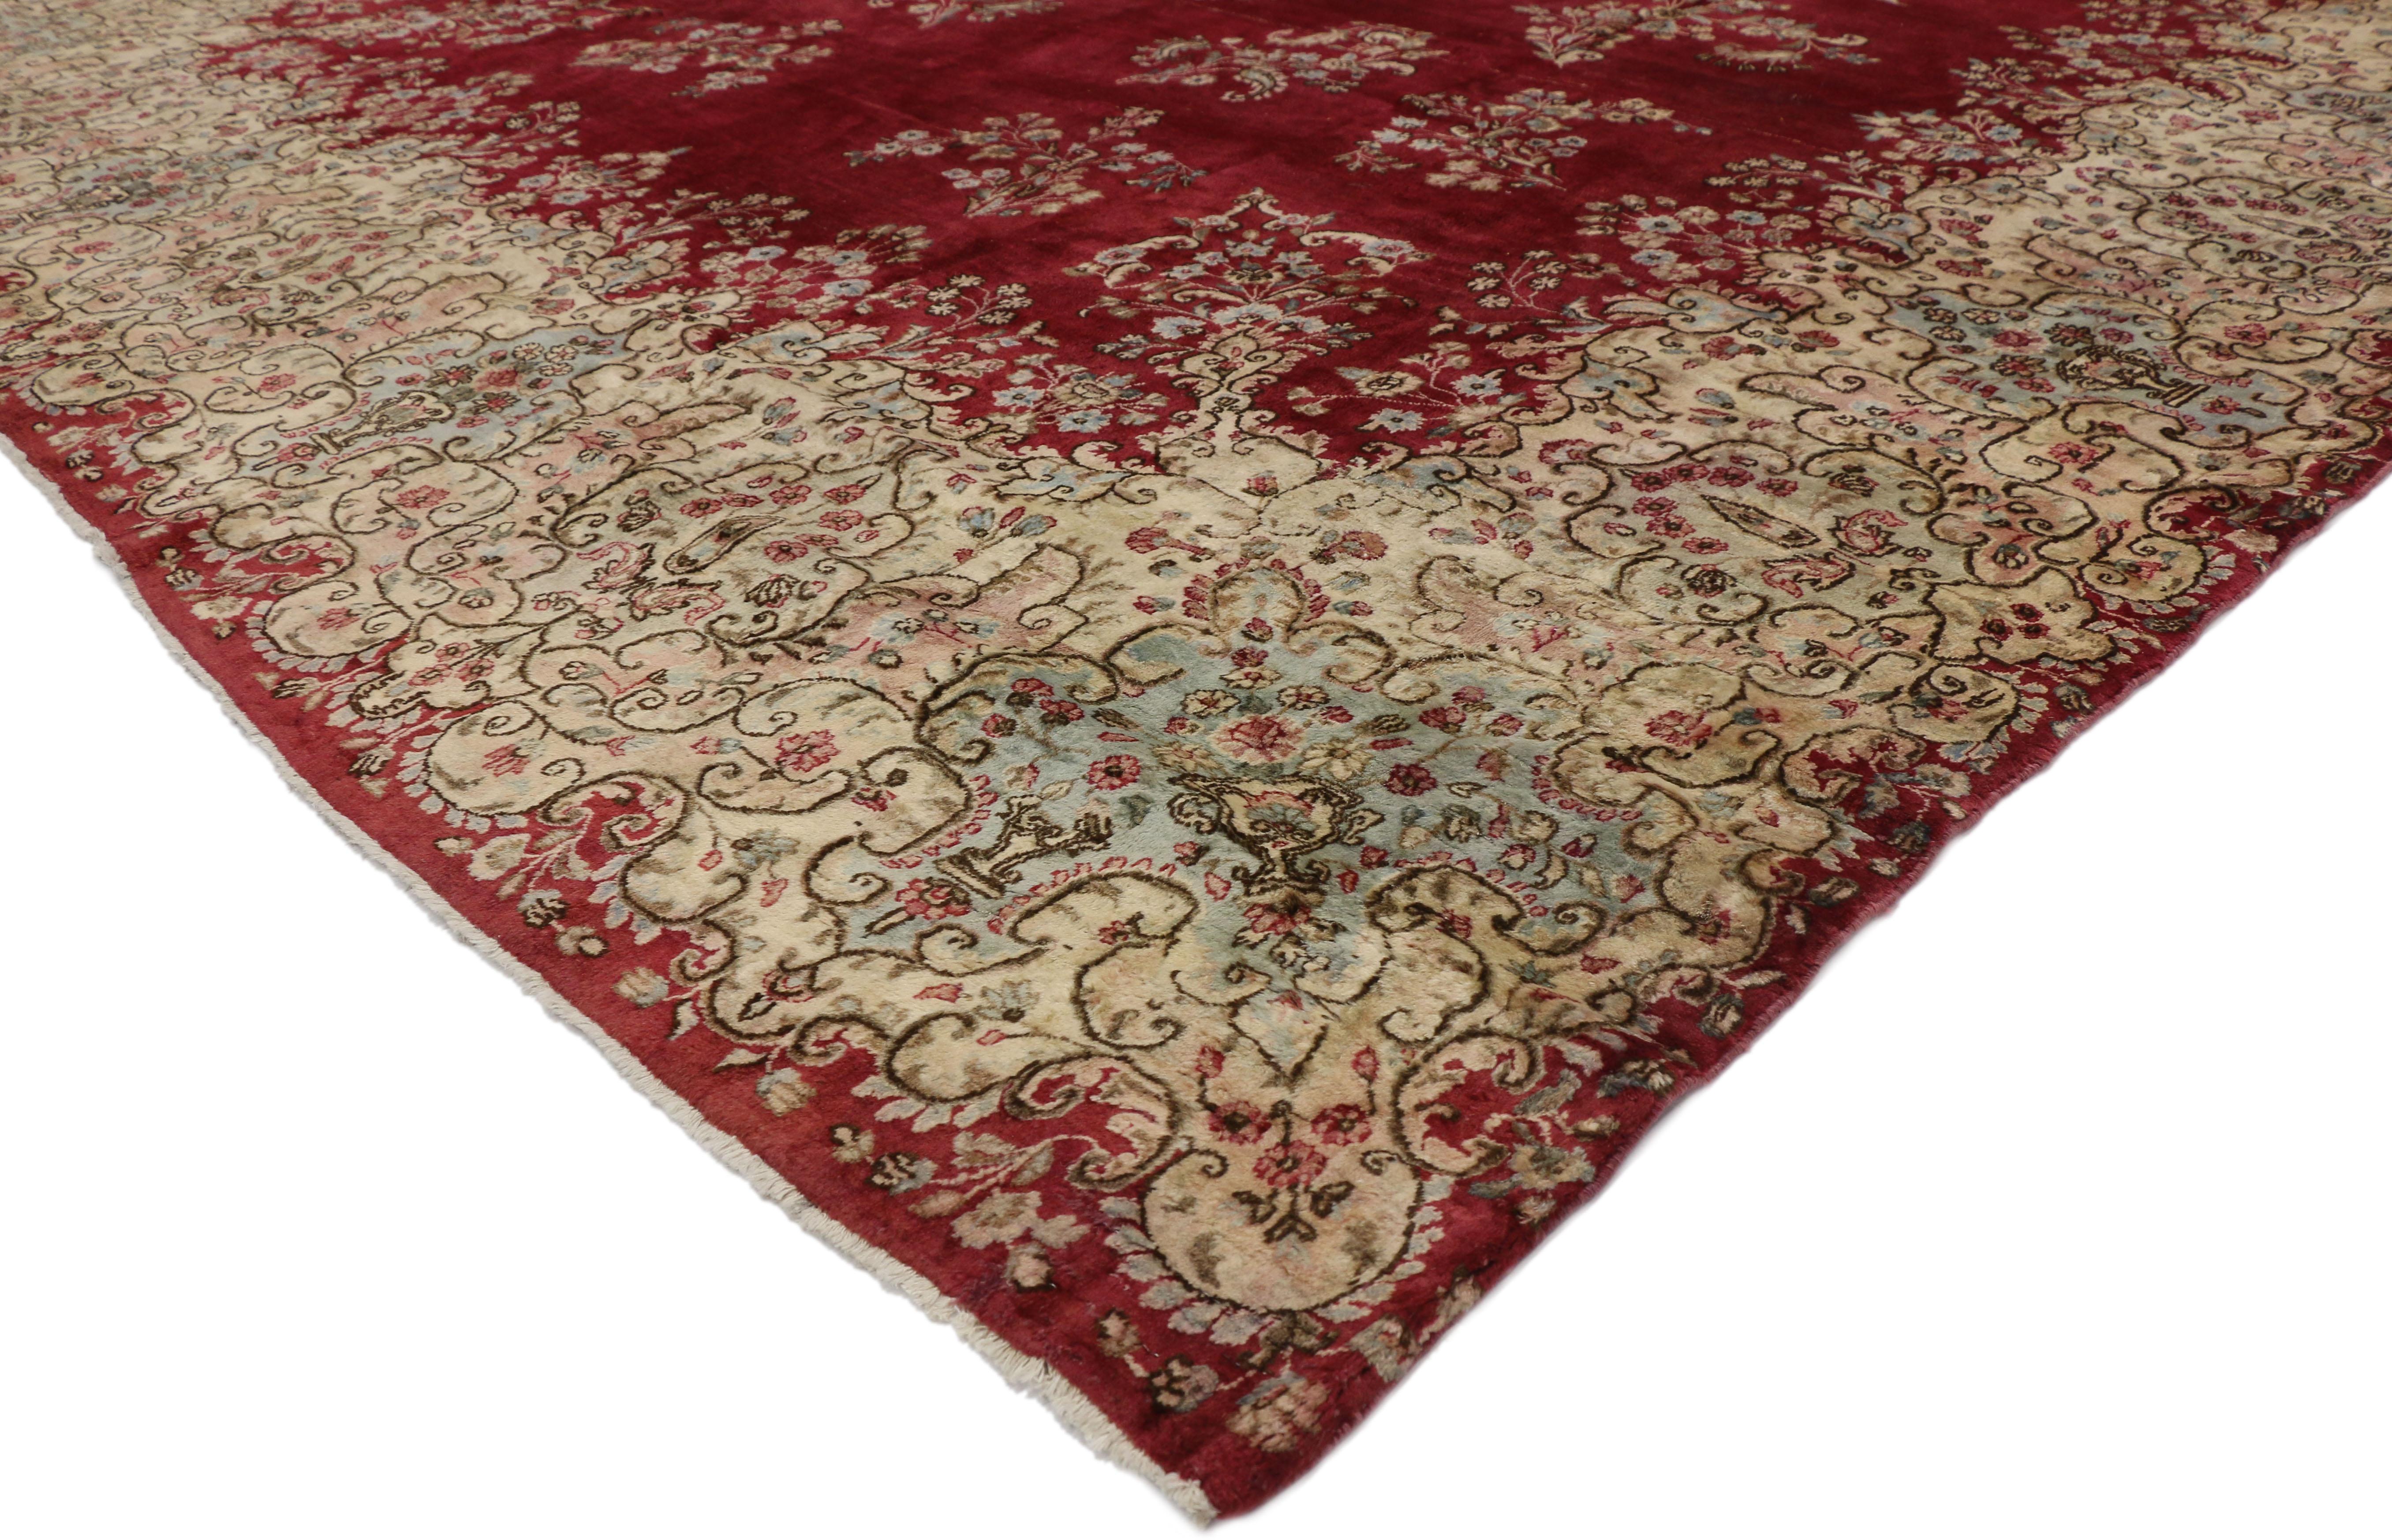 76516, vintage Persian Kerman rug with Victorian style. Opulence and grace meld together seamlessly in this vintage Persian Kerman rug with Victorian style. The most striking element is the bright center field in a lustrous ruby red. Meanwhile a